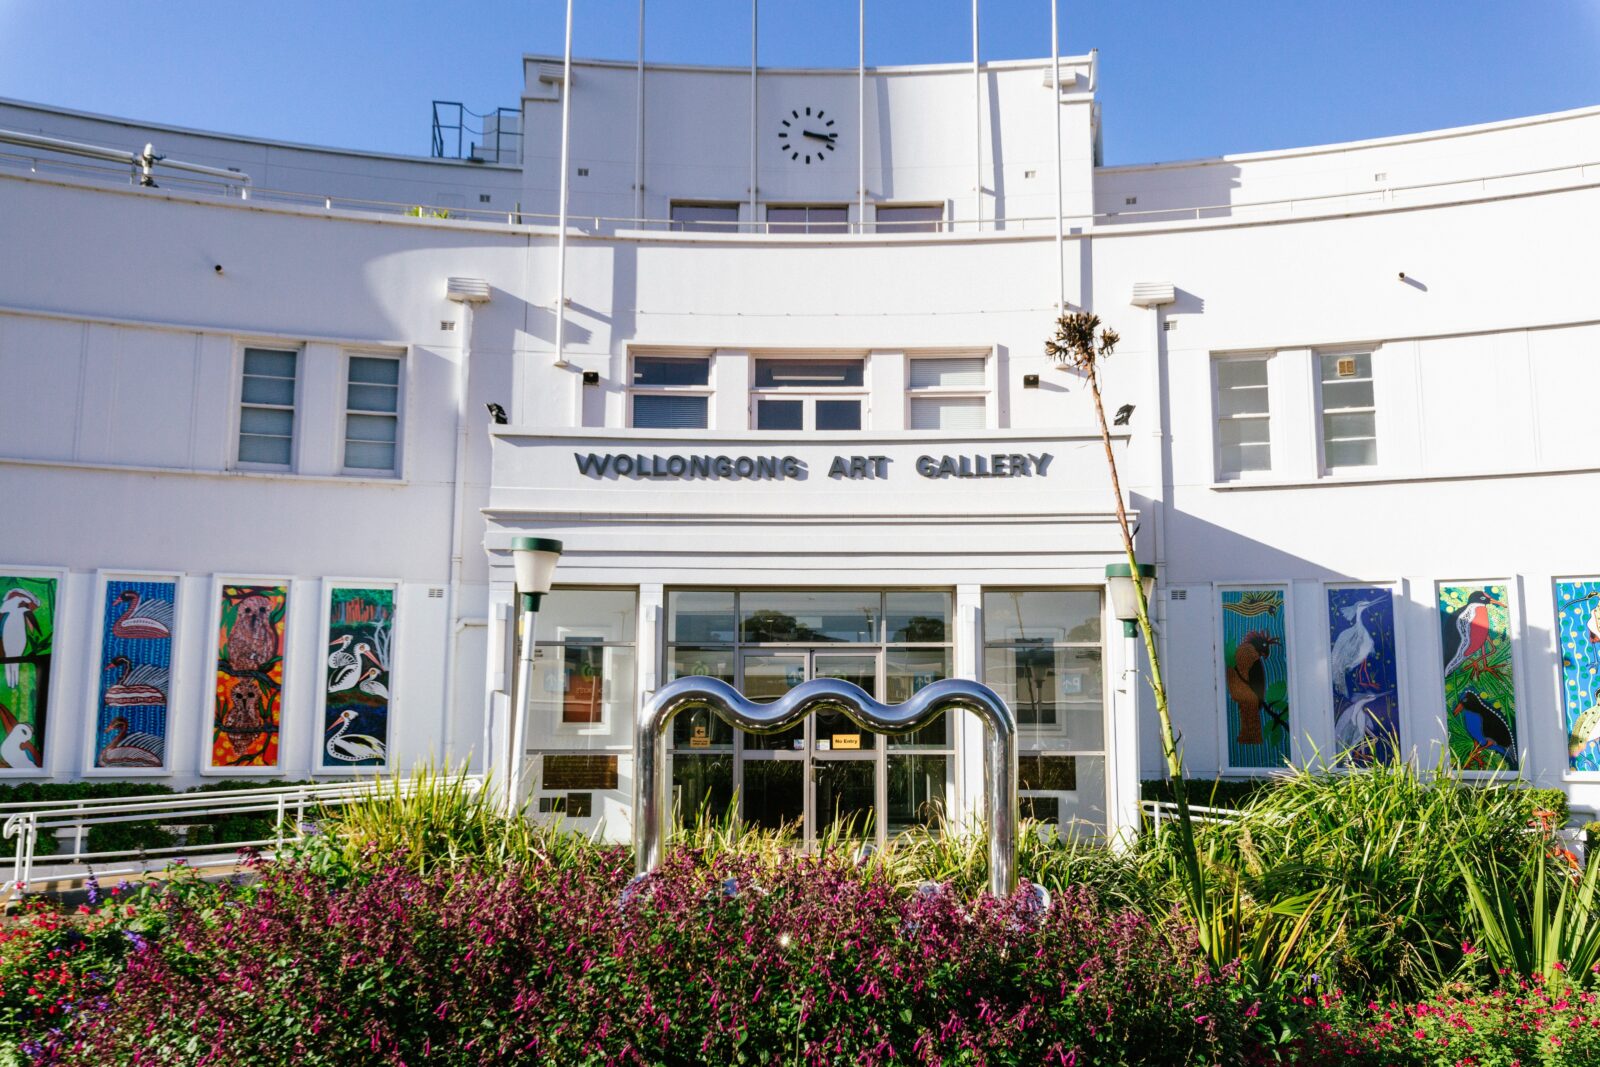 Exterior view of the Wollongong Art Gallery